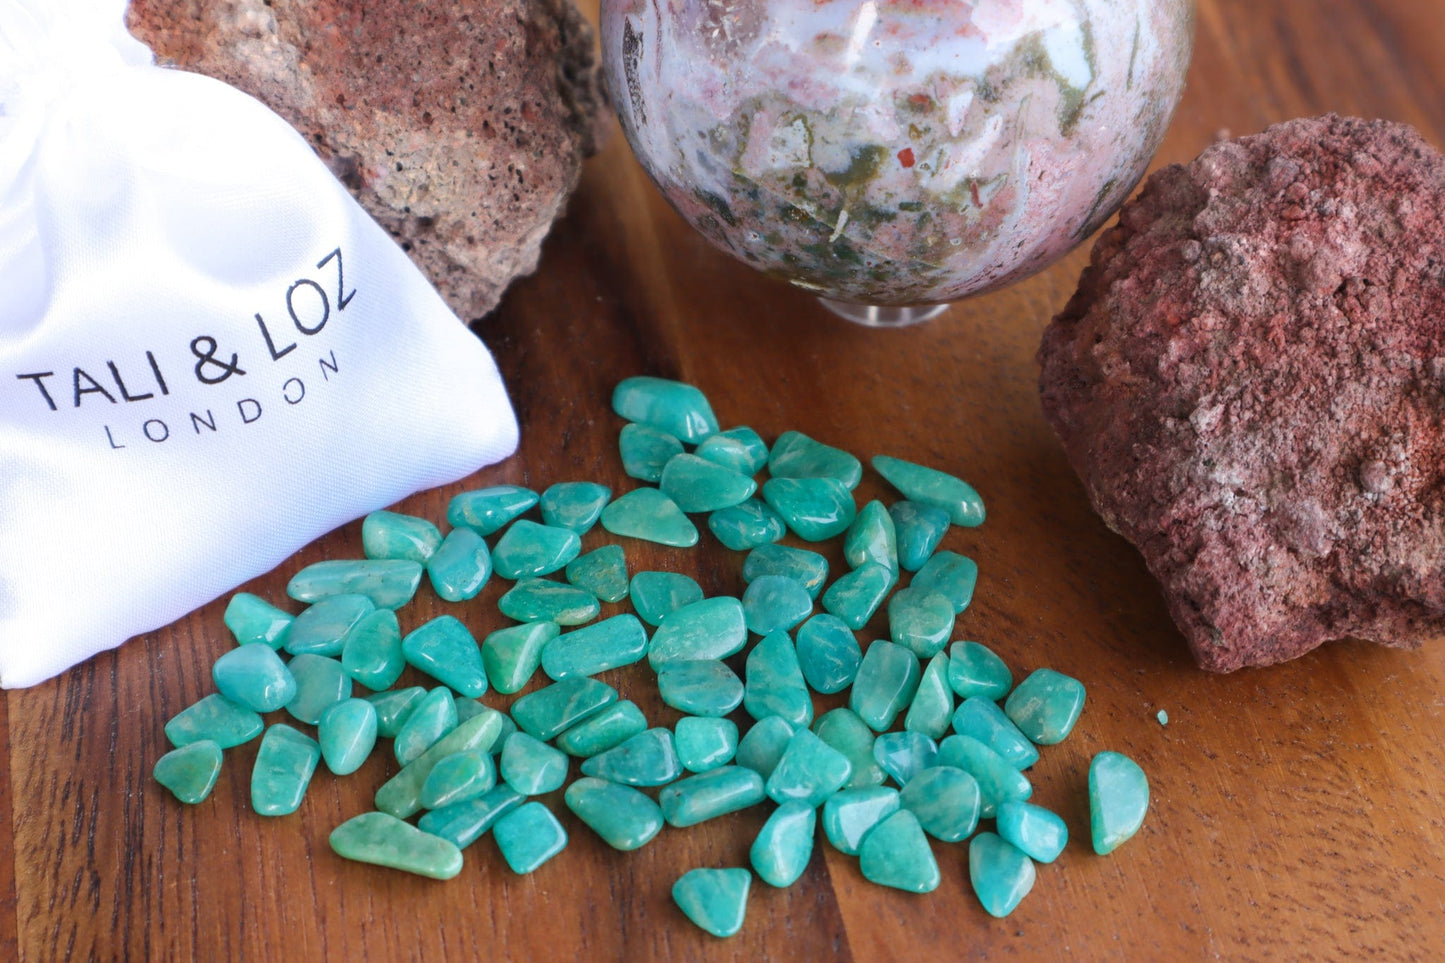 Amazonite Chips - Anxiety/Protection Crystal Chips Tali & Loz